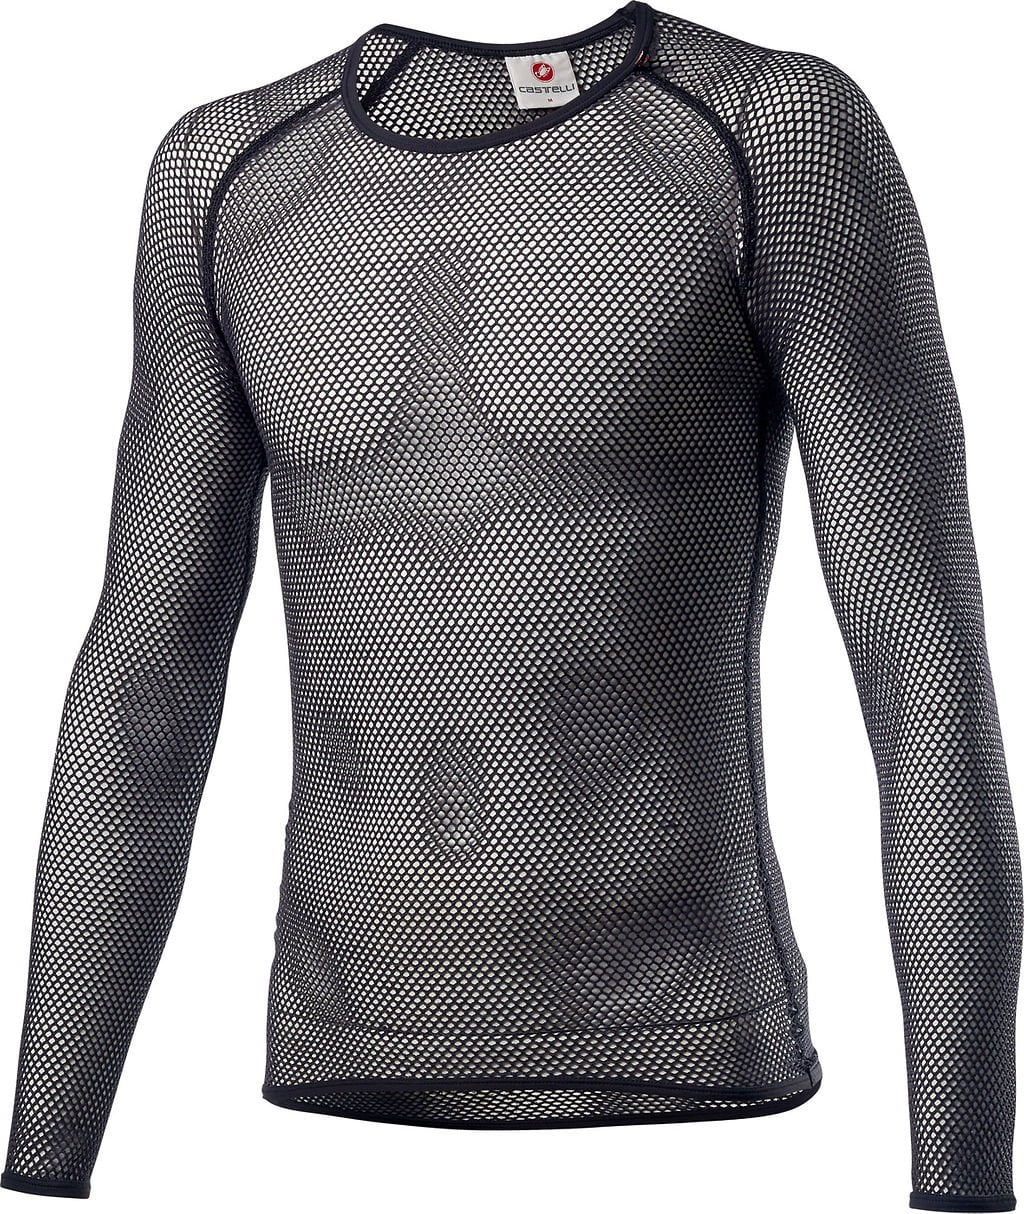 Miracolo Wool Long Sleeve Cycling Base Layer Base Layer, for men, size L